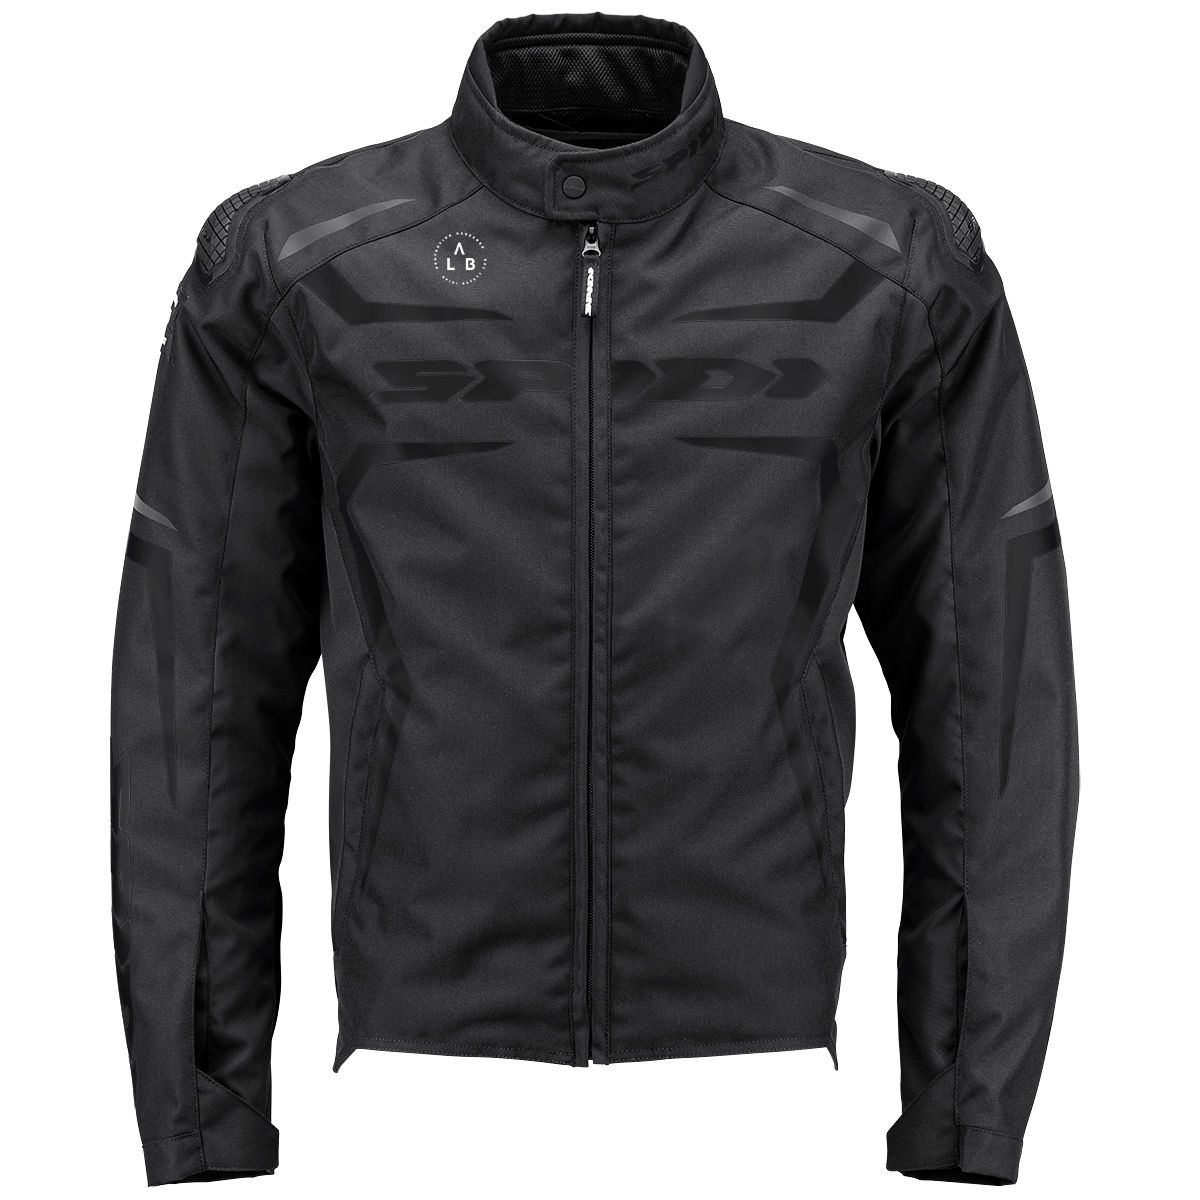 Image of Spidi Race-Evo H2Out Jacket Black Size 4XL ID 8030161460414